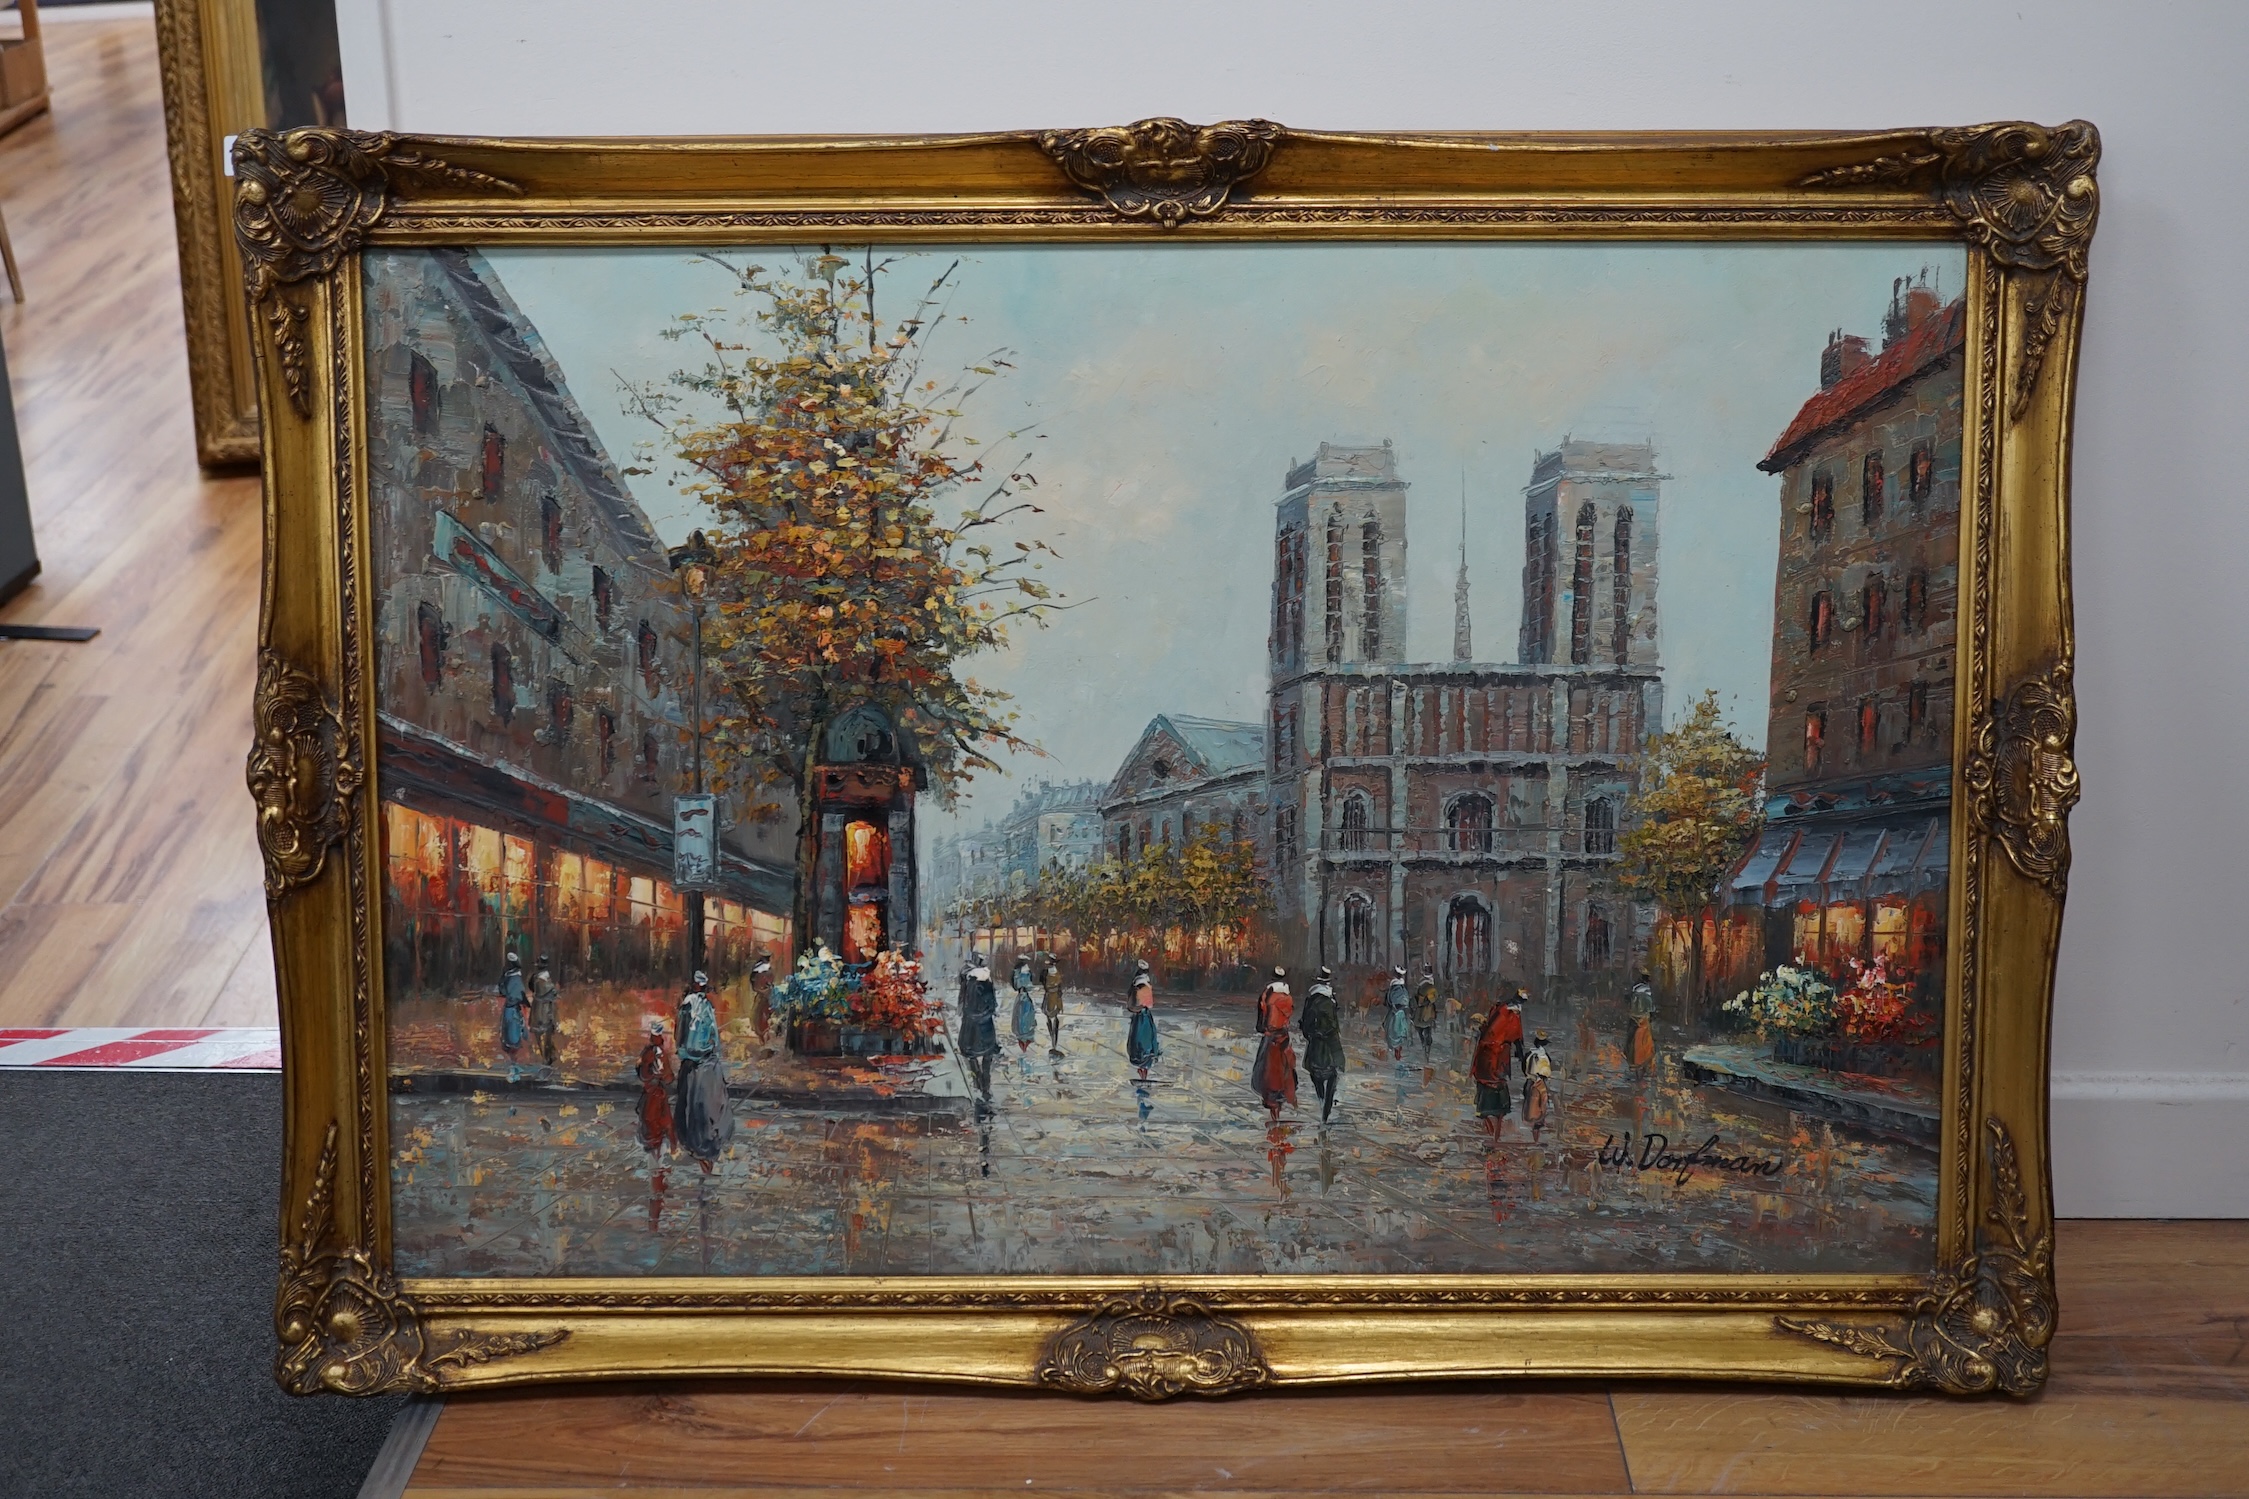 French, oil on canvas, Parisian street scene, indistinctly signed lower right, 59 x 90cm, gilt framed. Condition - good